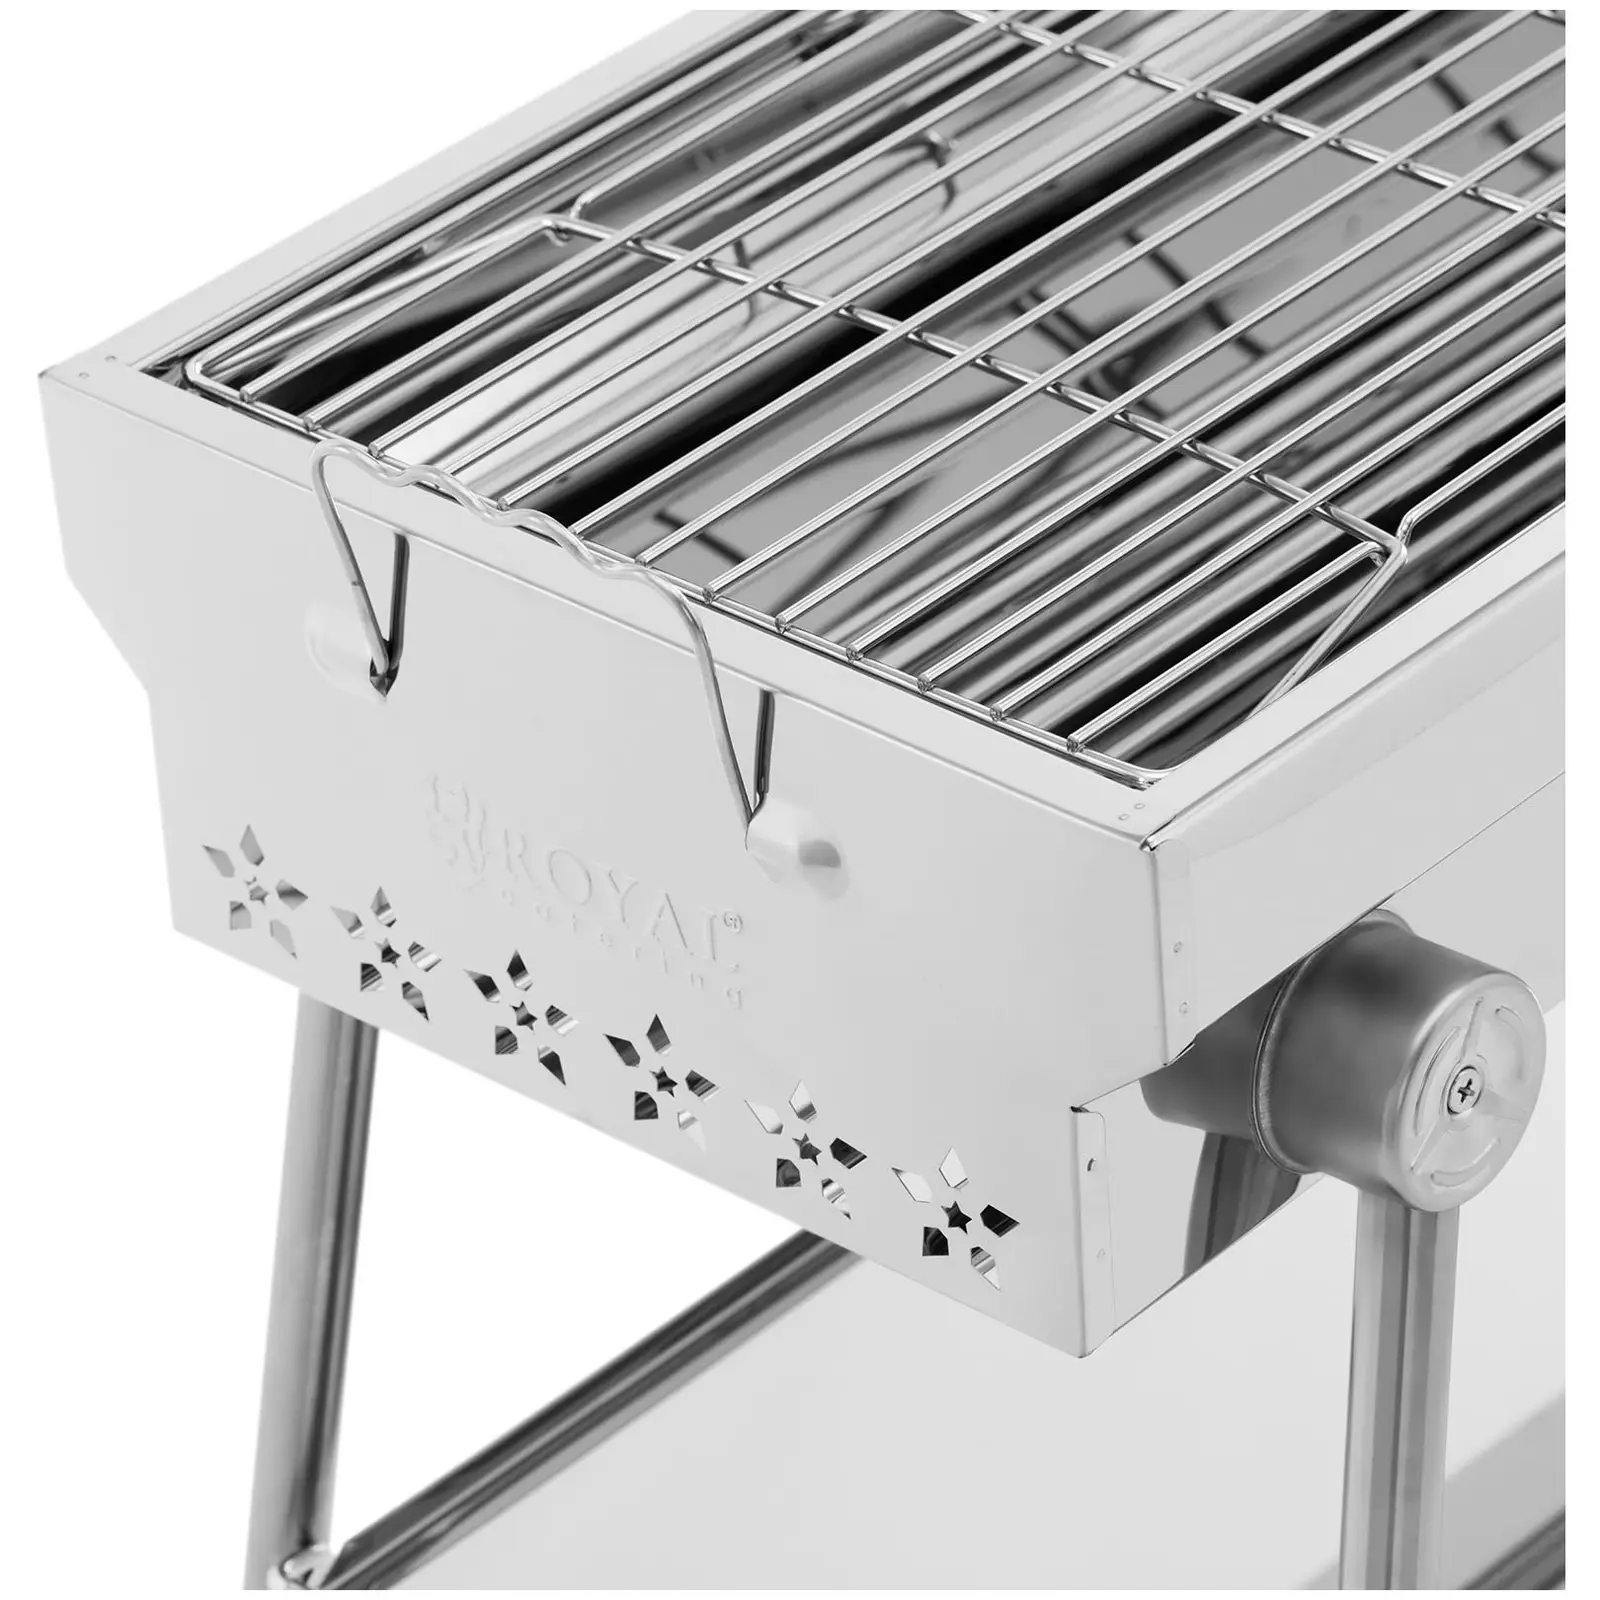 Charcoal grill - Shelf - folding grill - 75 x 25 cm - stainless steel / steel - Royal Catering